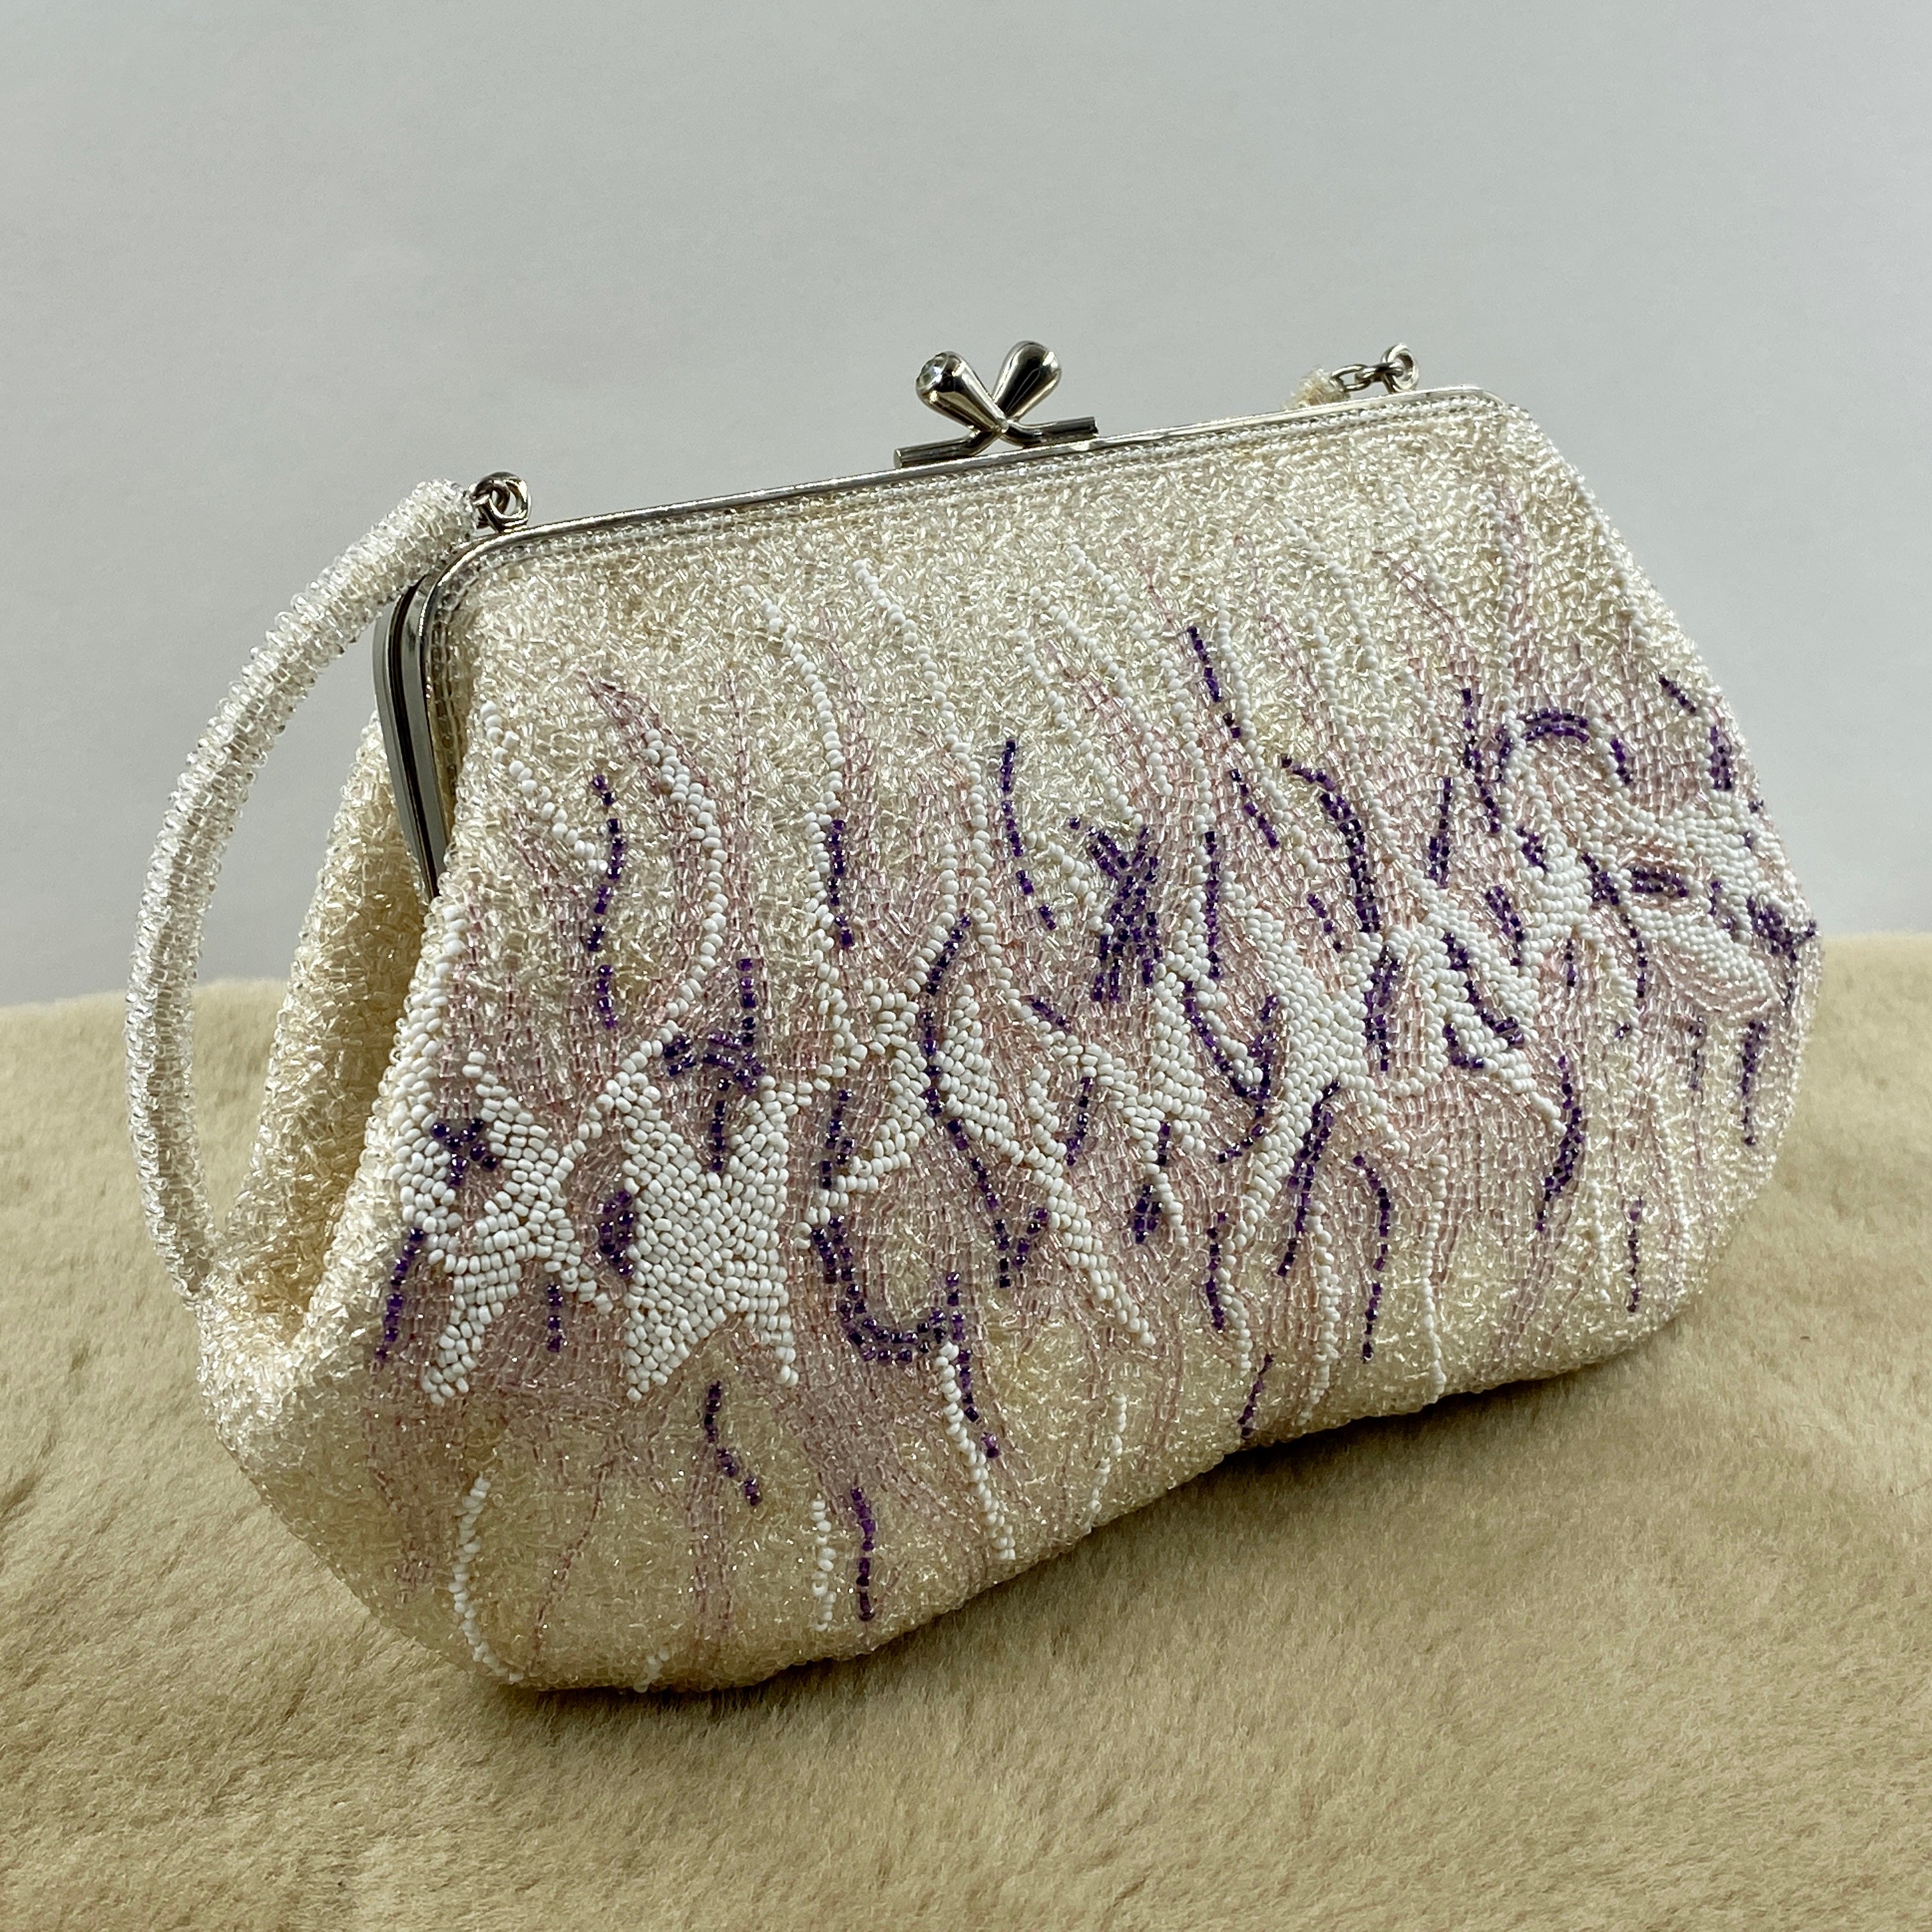 Beaded Purse from Japan with White & Purple Abstract Motif (Vintage 1950's-1960's) Fits Most Cell Phones